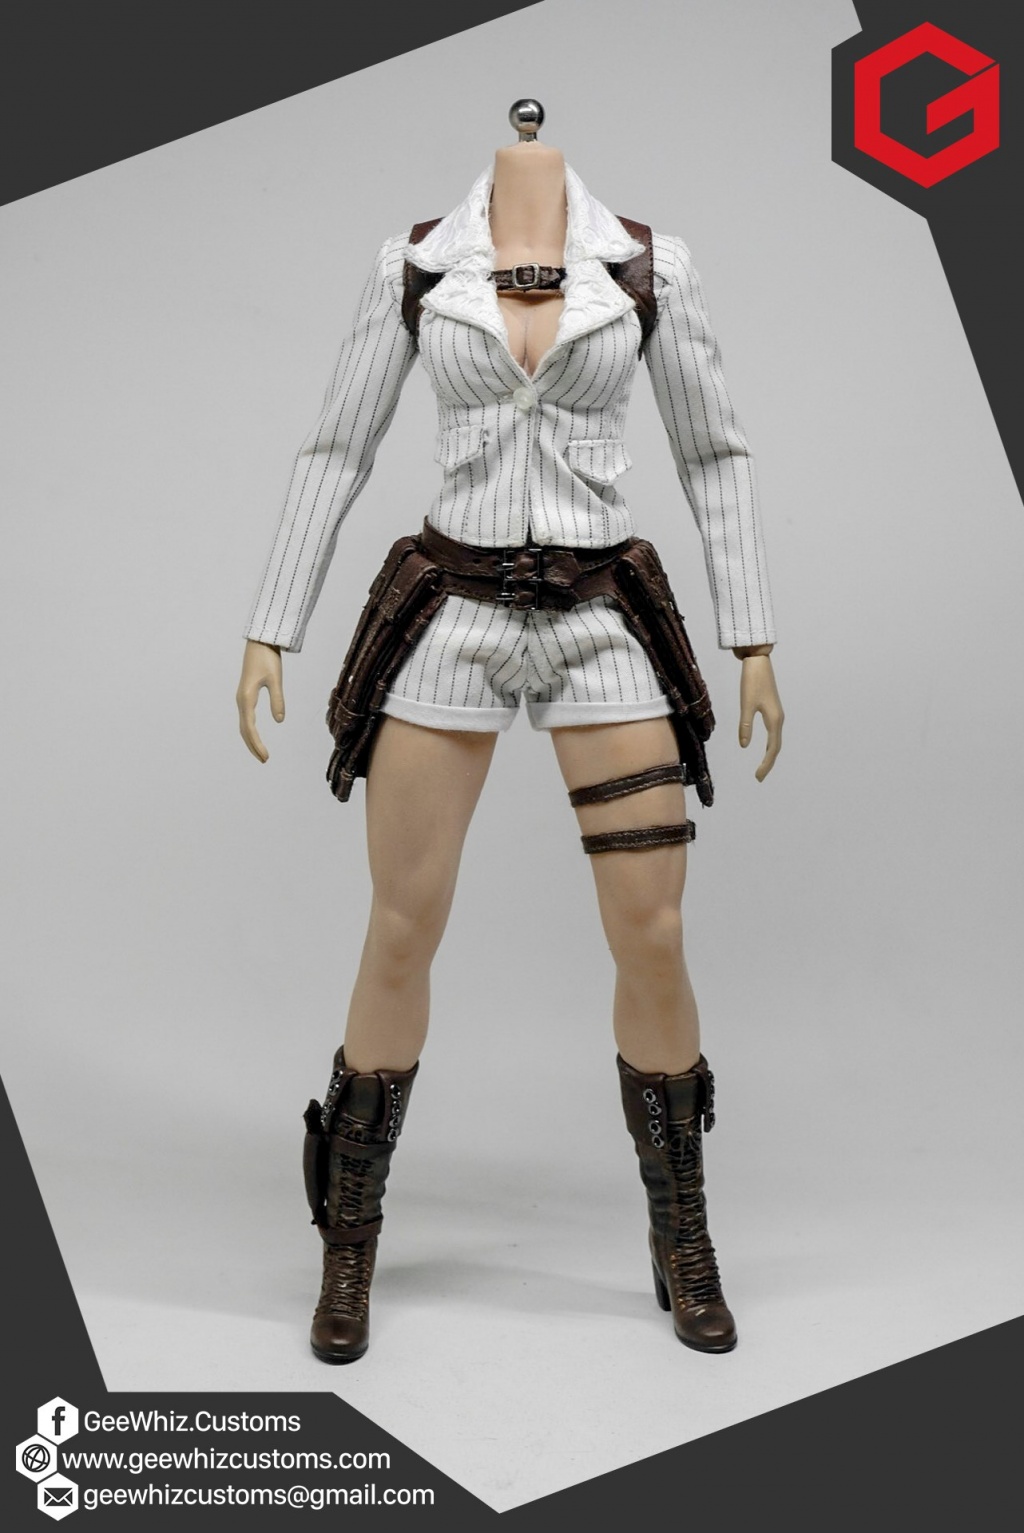 Geewhiz Customs Lady S Outfit From Dmc4